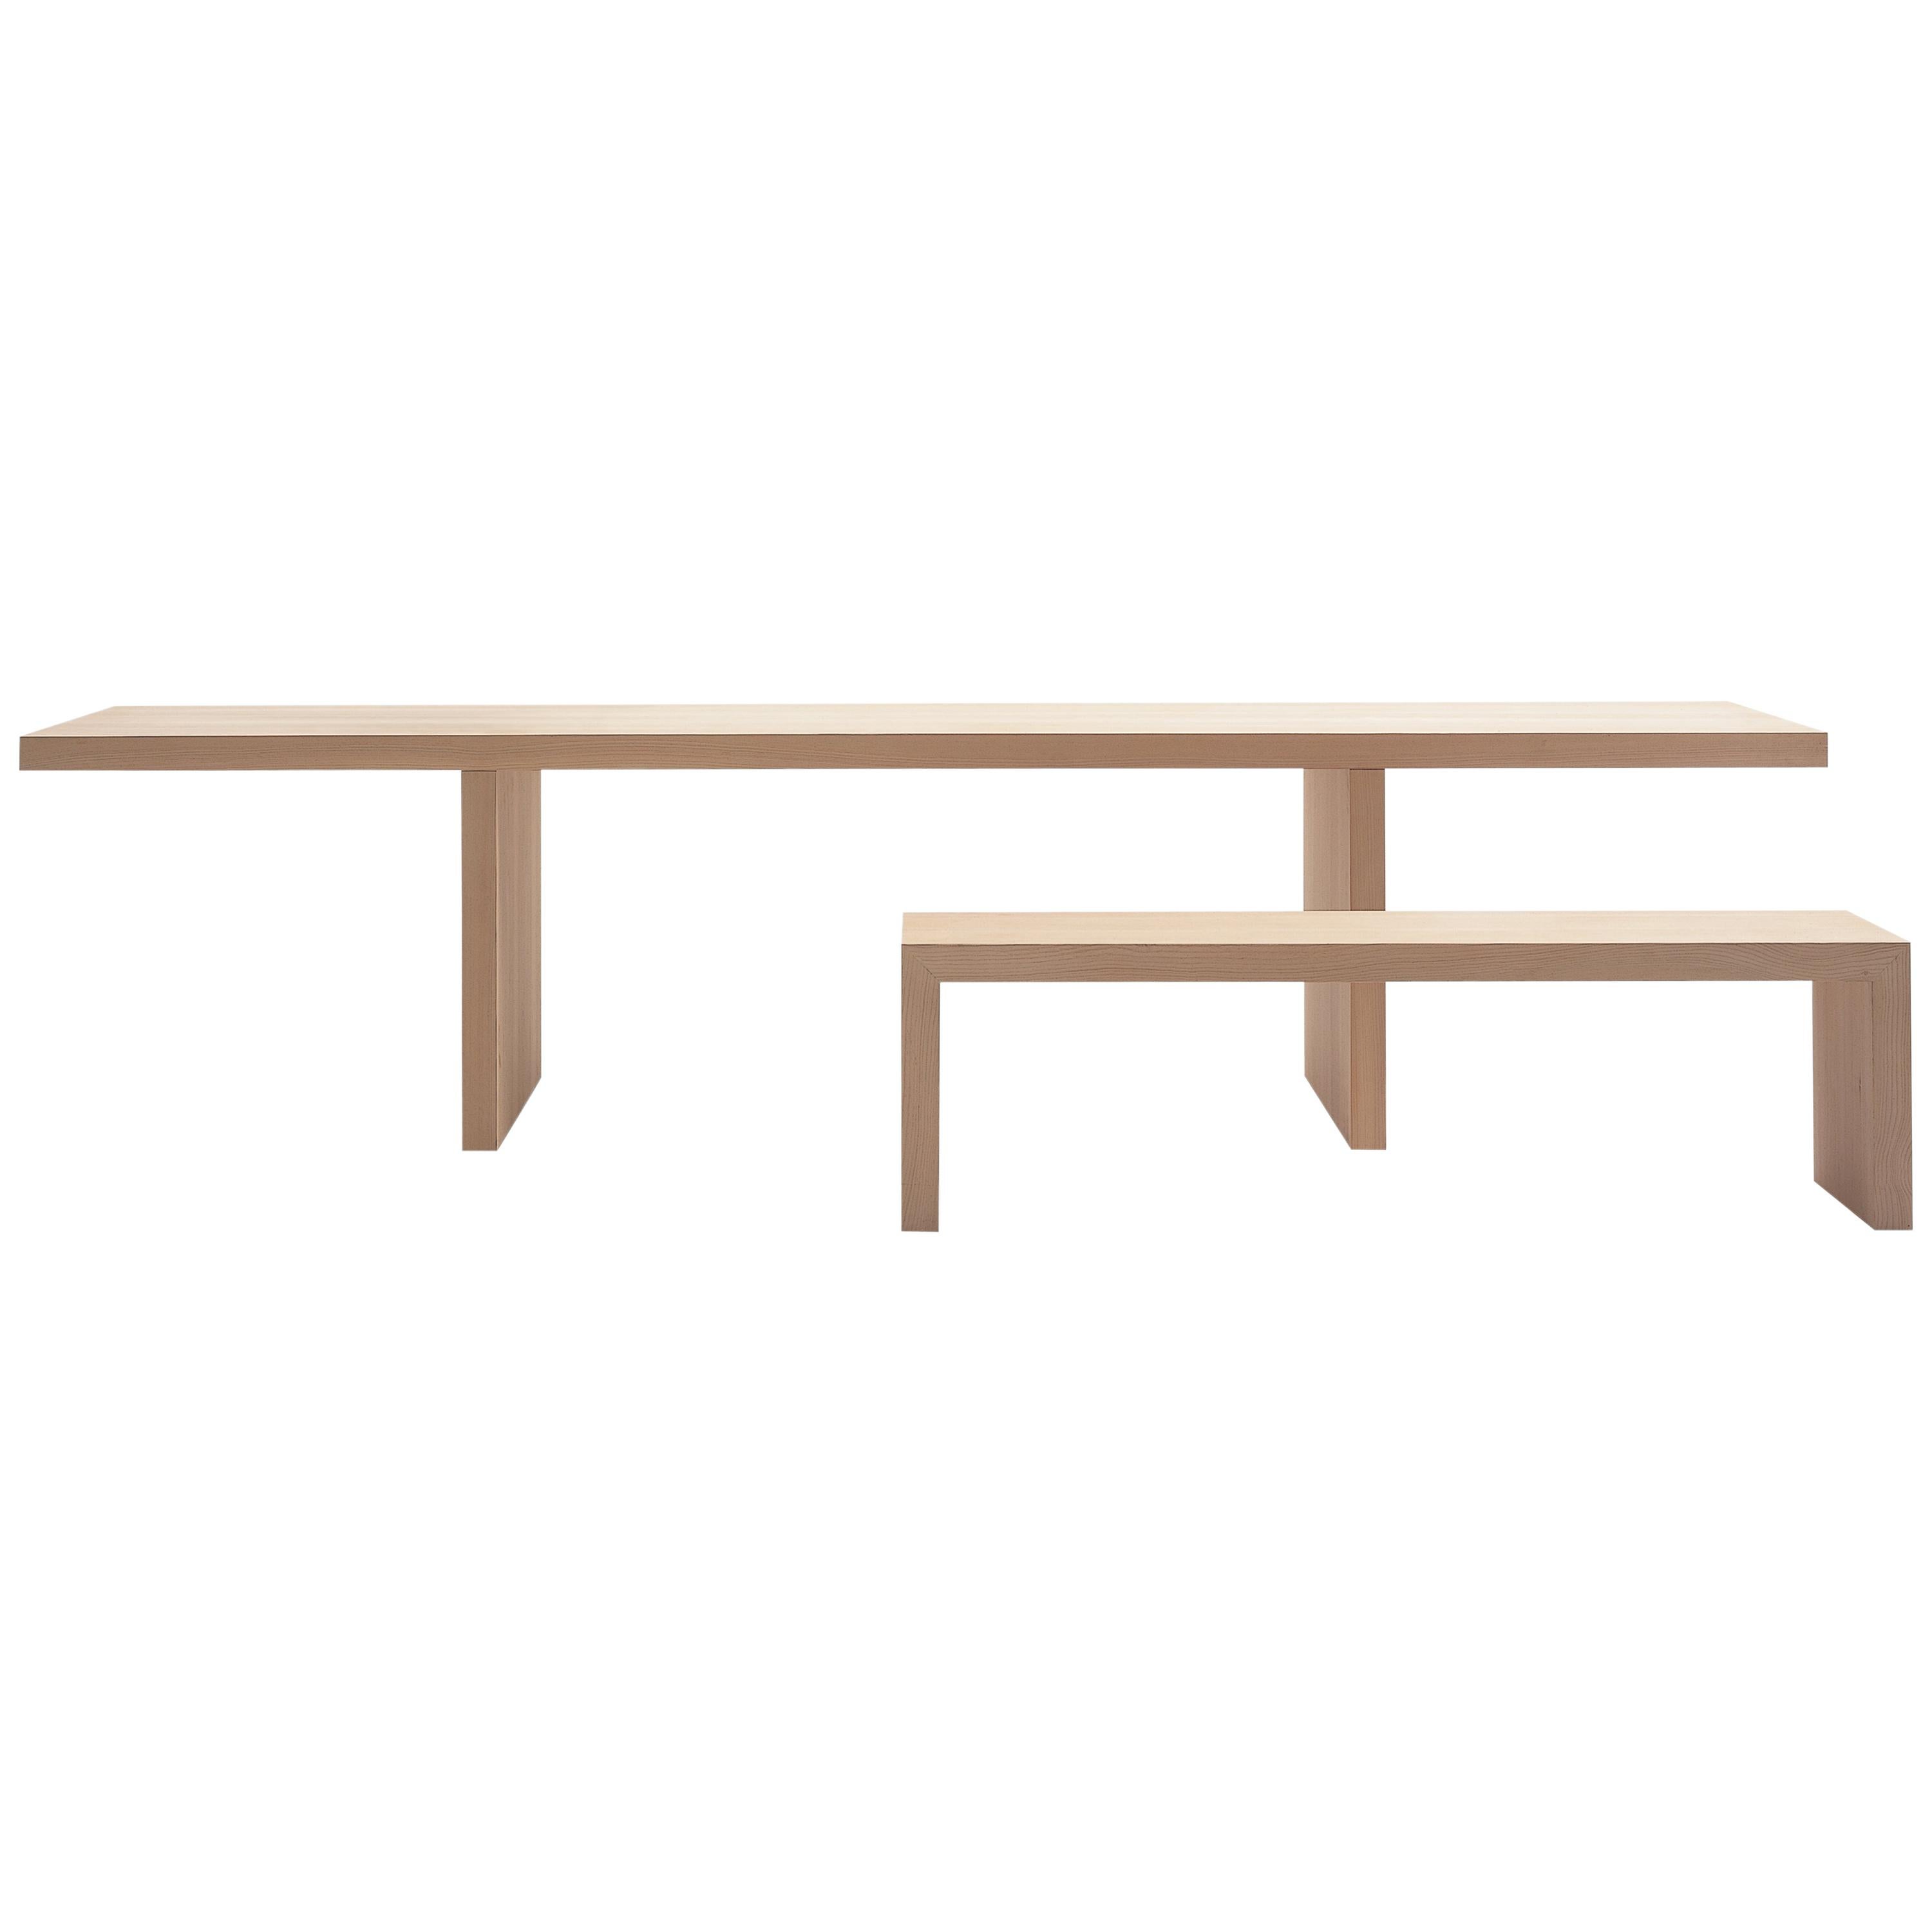 Claudio Silvestrin Millenium Hope Bench in Honeycomb Fir for Cappellini